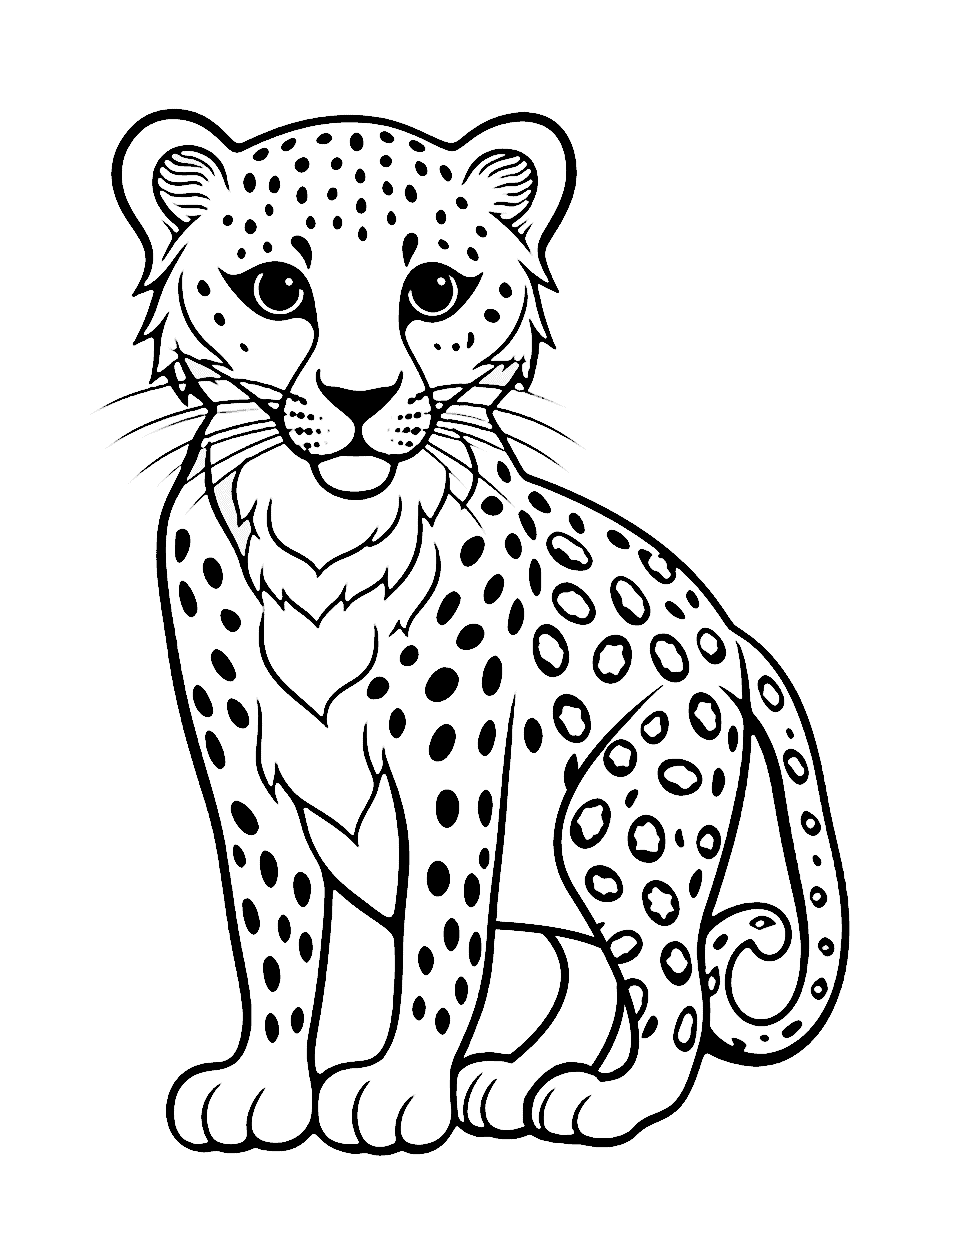 Cheetah with Patterned Spots Coloring Page - A cheetah with uniquely patterned spots for creative coloring.